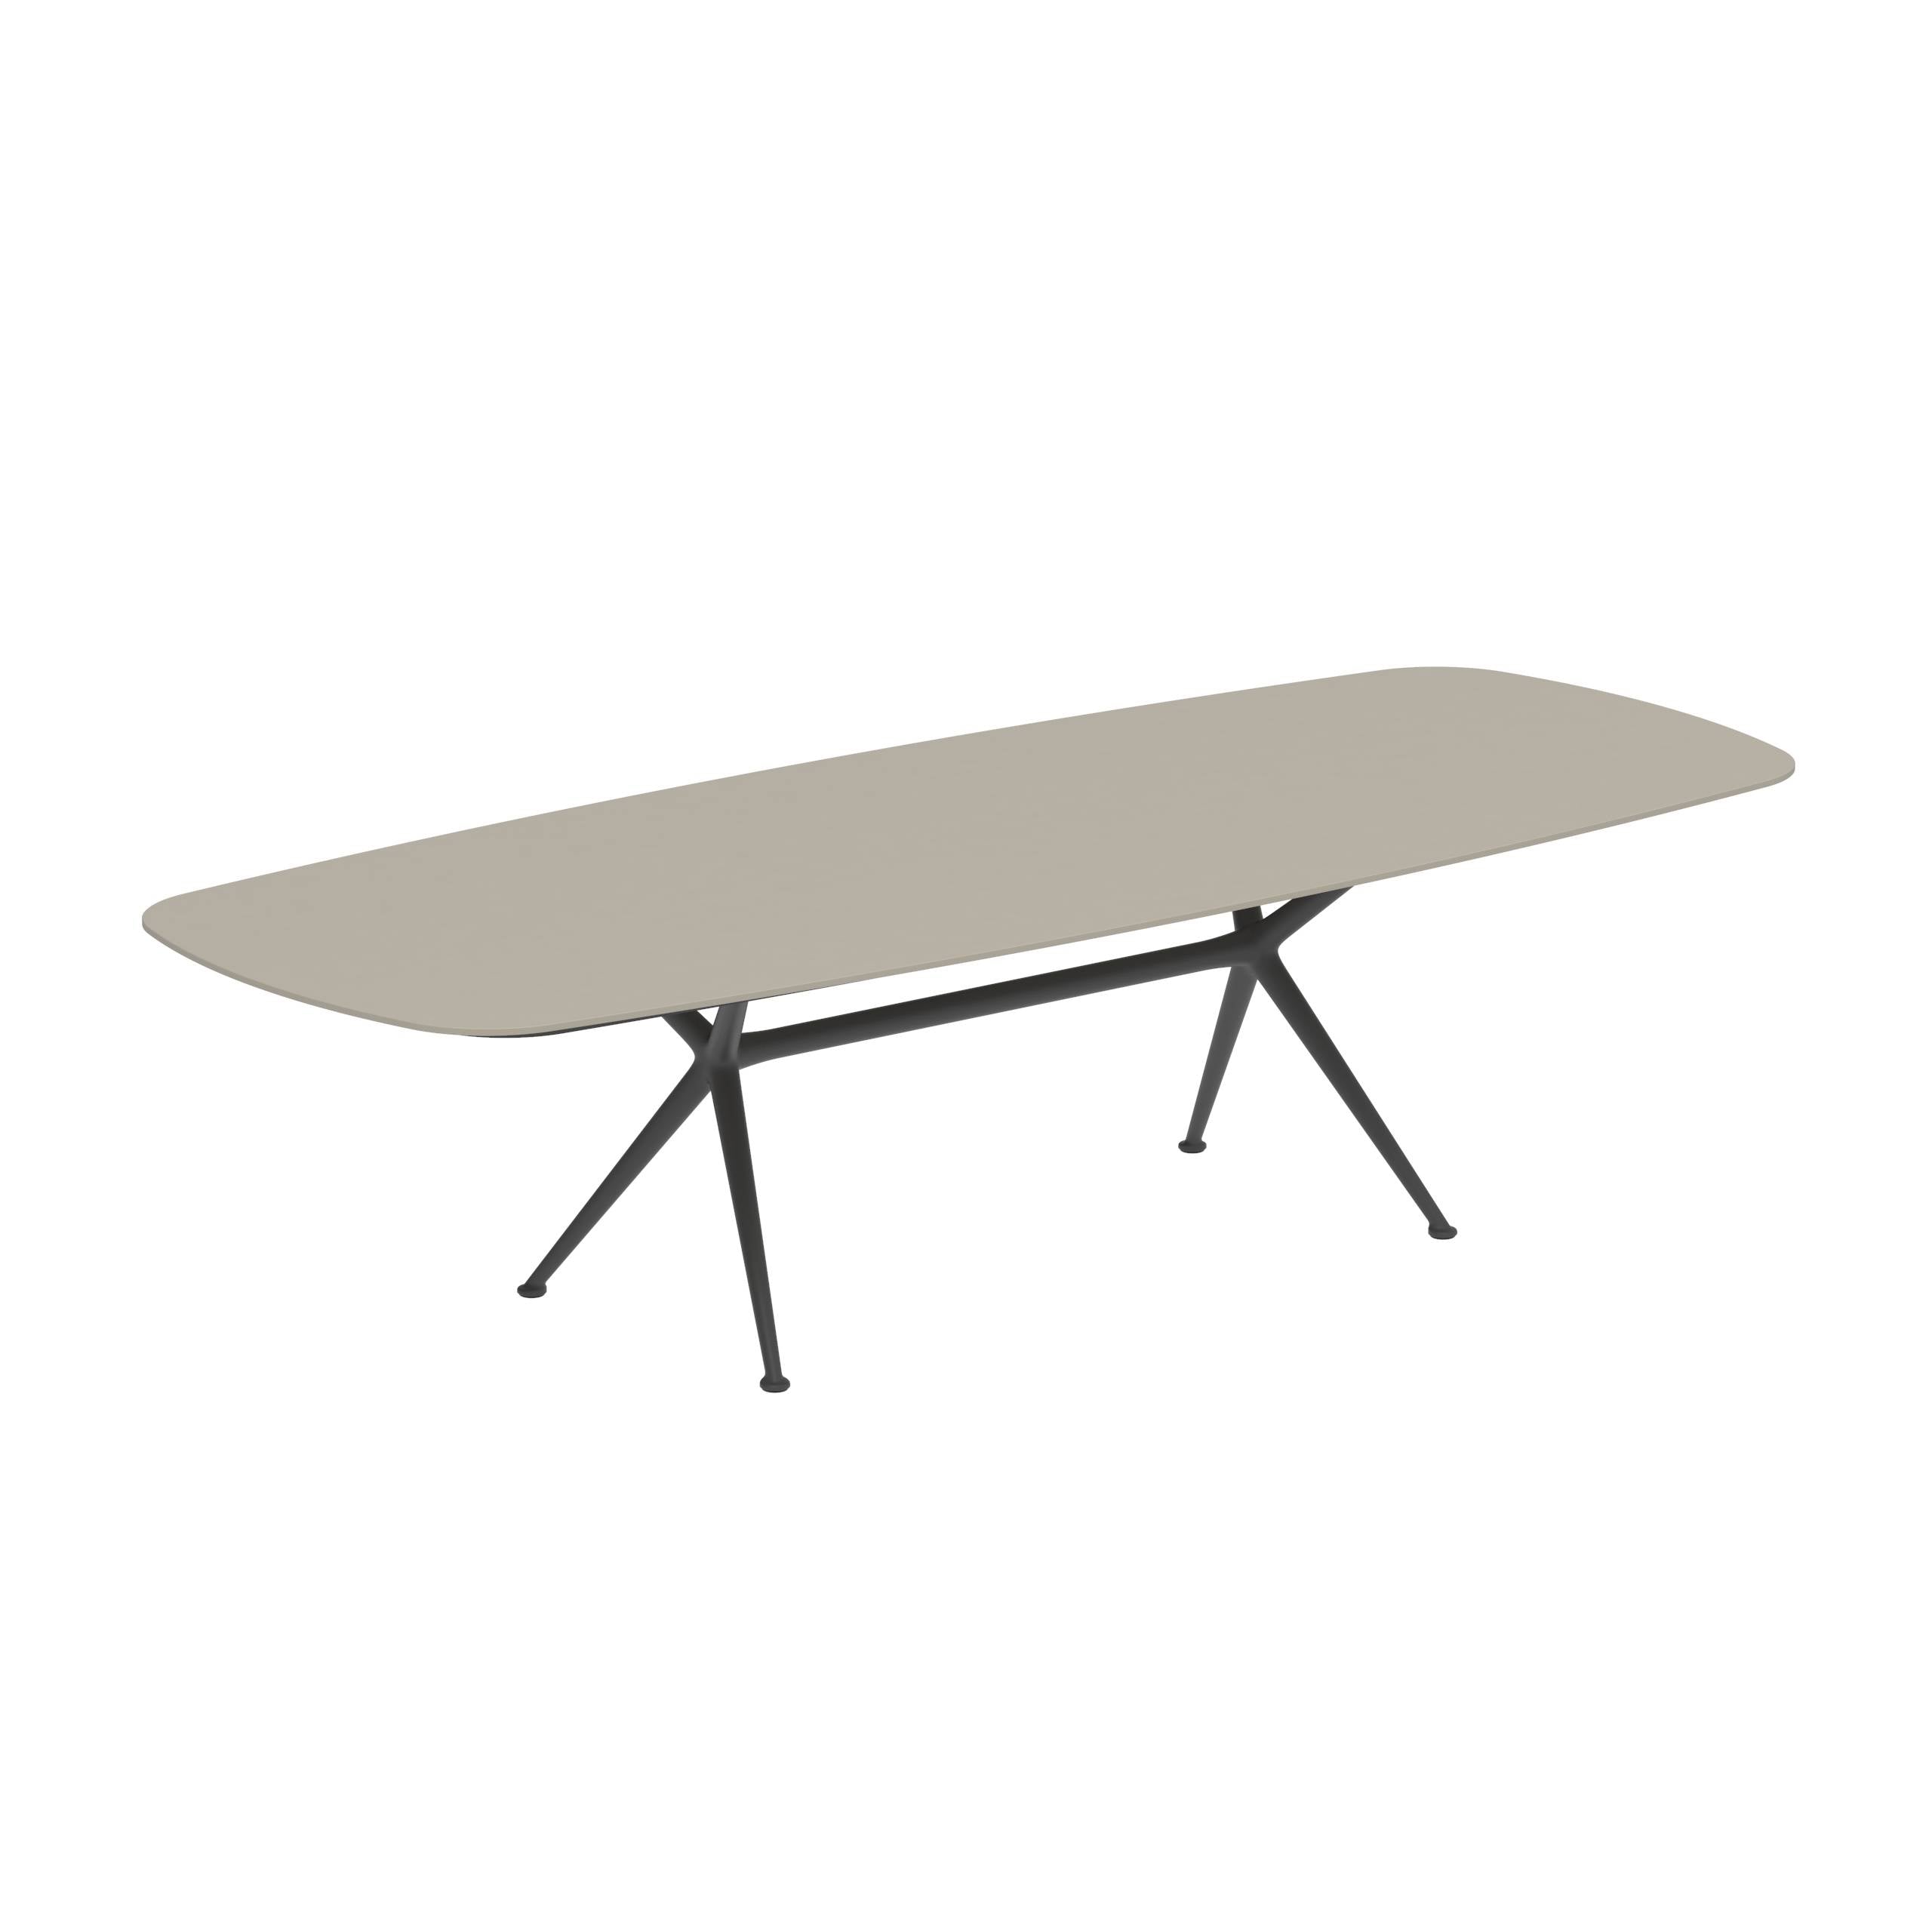 Exes Table 300x120cm Alu Legs Anthracite - Table Top Ceramic Pearl Grey